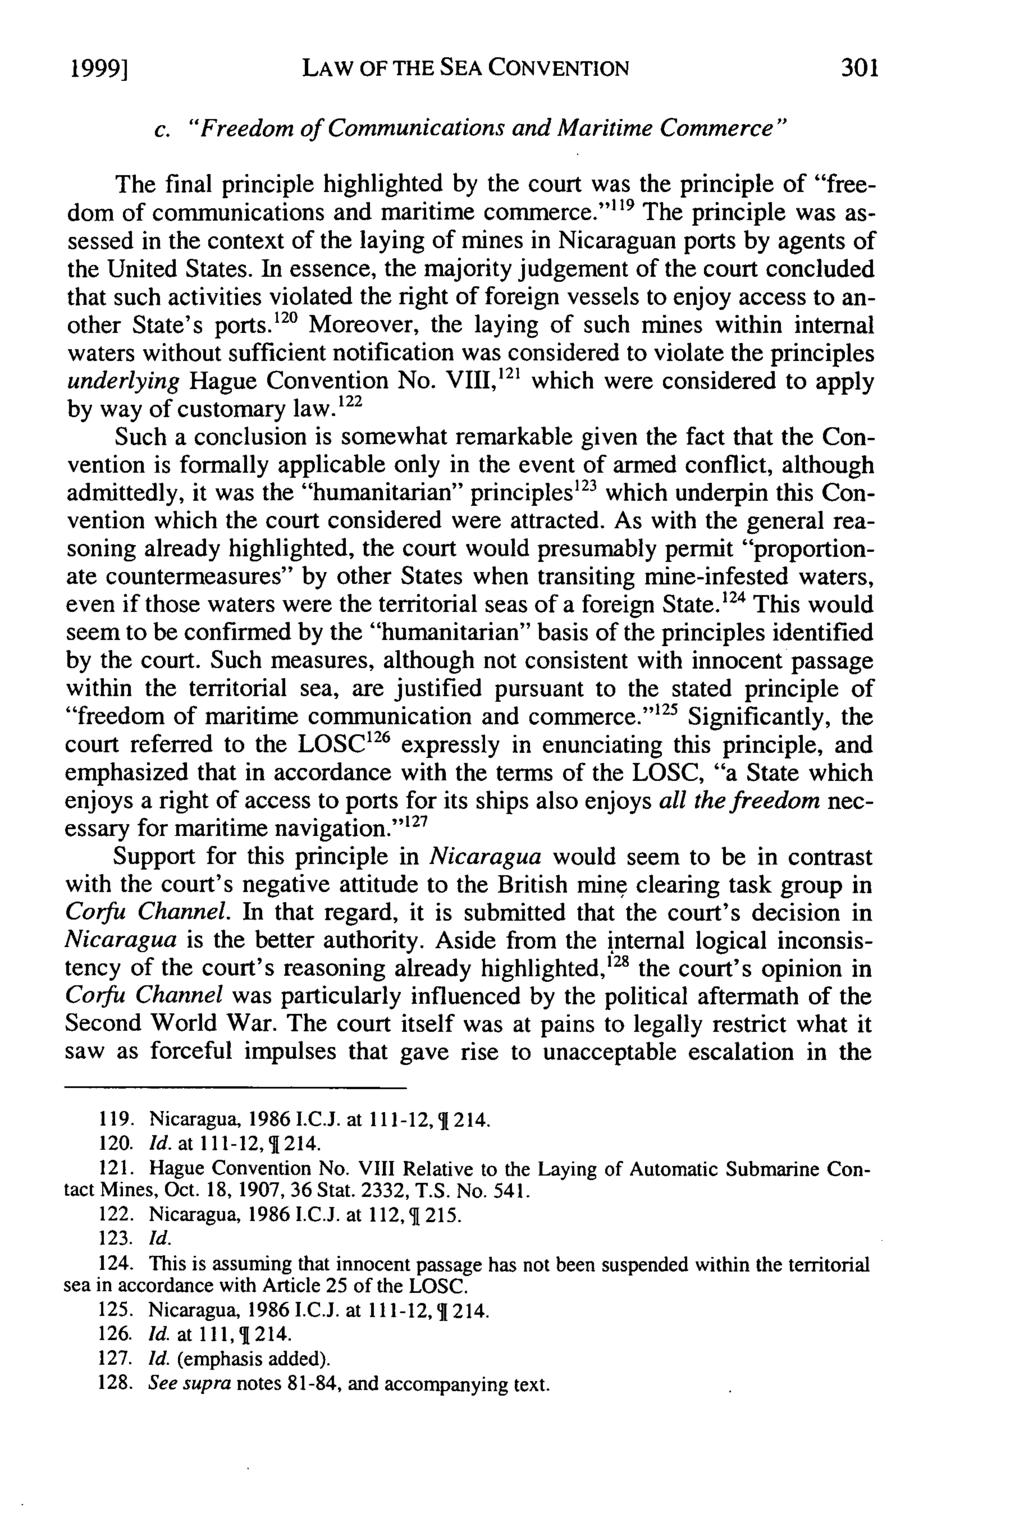 1999] Stephens: The Impact of the 1982 Law of the Sea Convention on the Conduct o LAW OF THE SEA CONVENTION c.